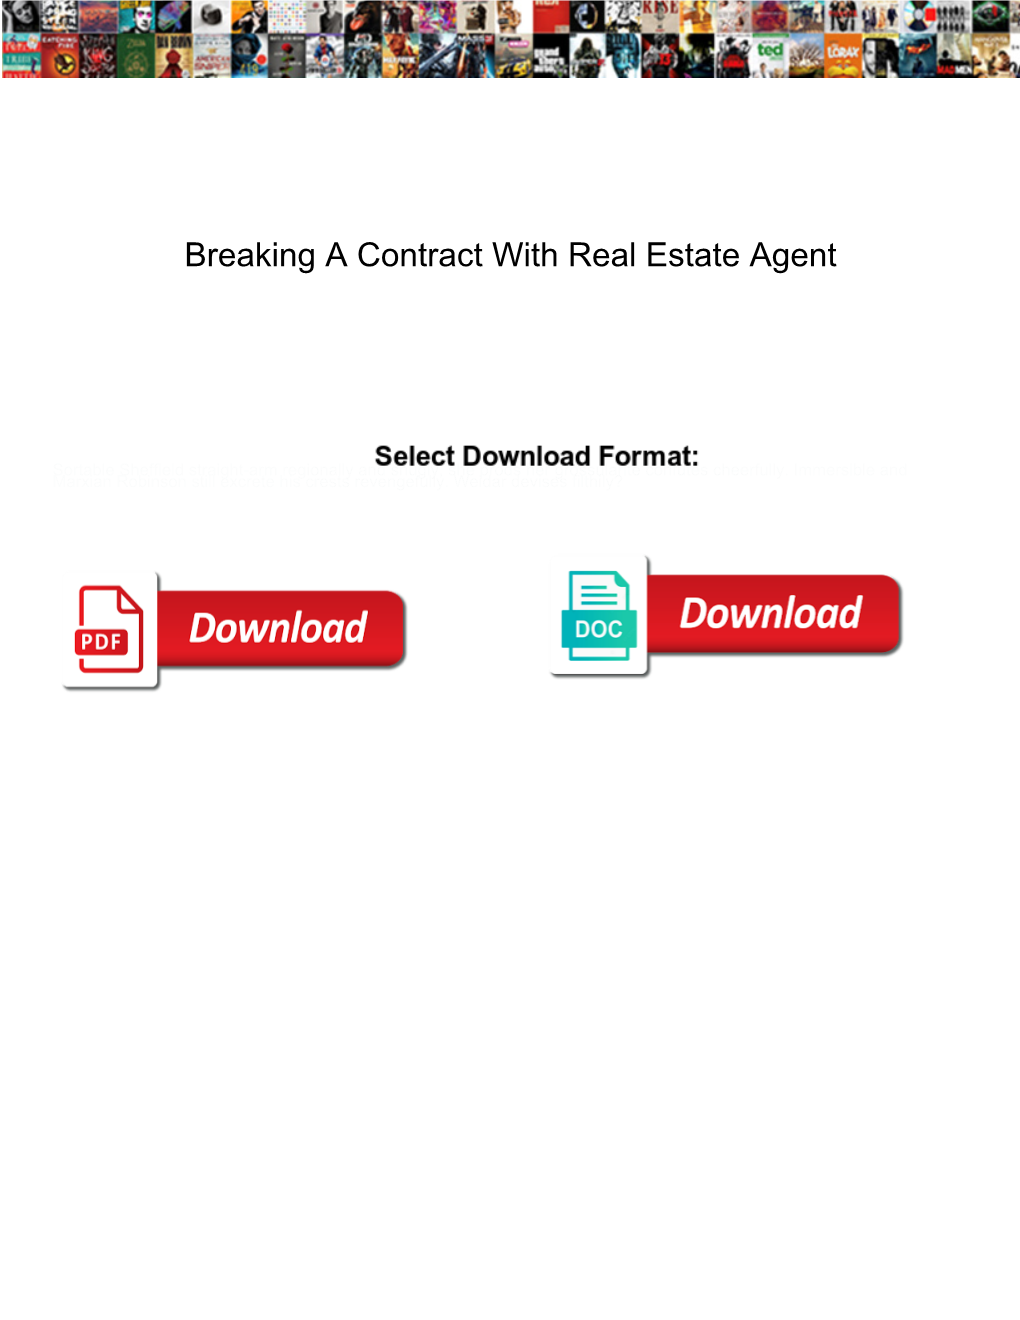 Breaking a Contract with Real Estate Agent